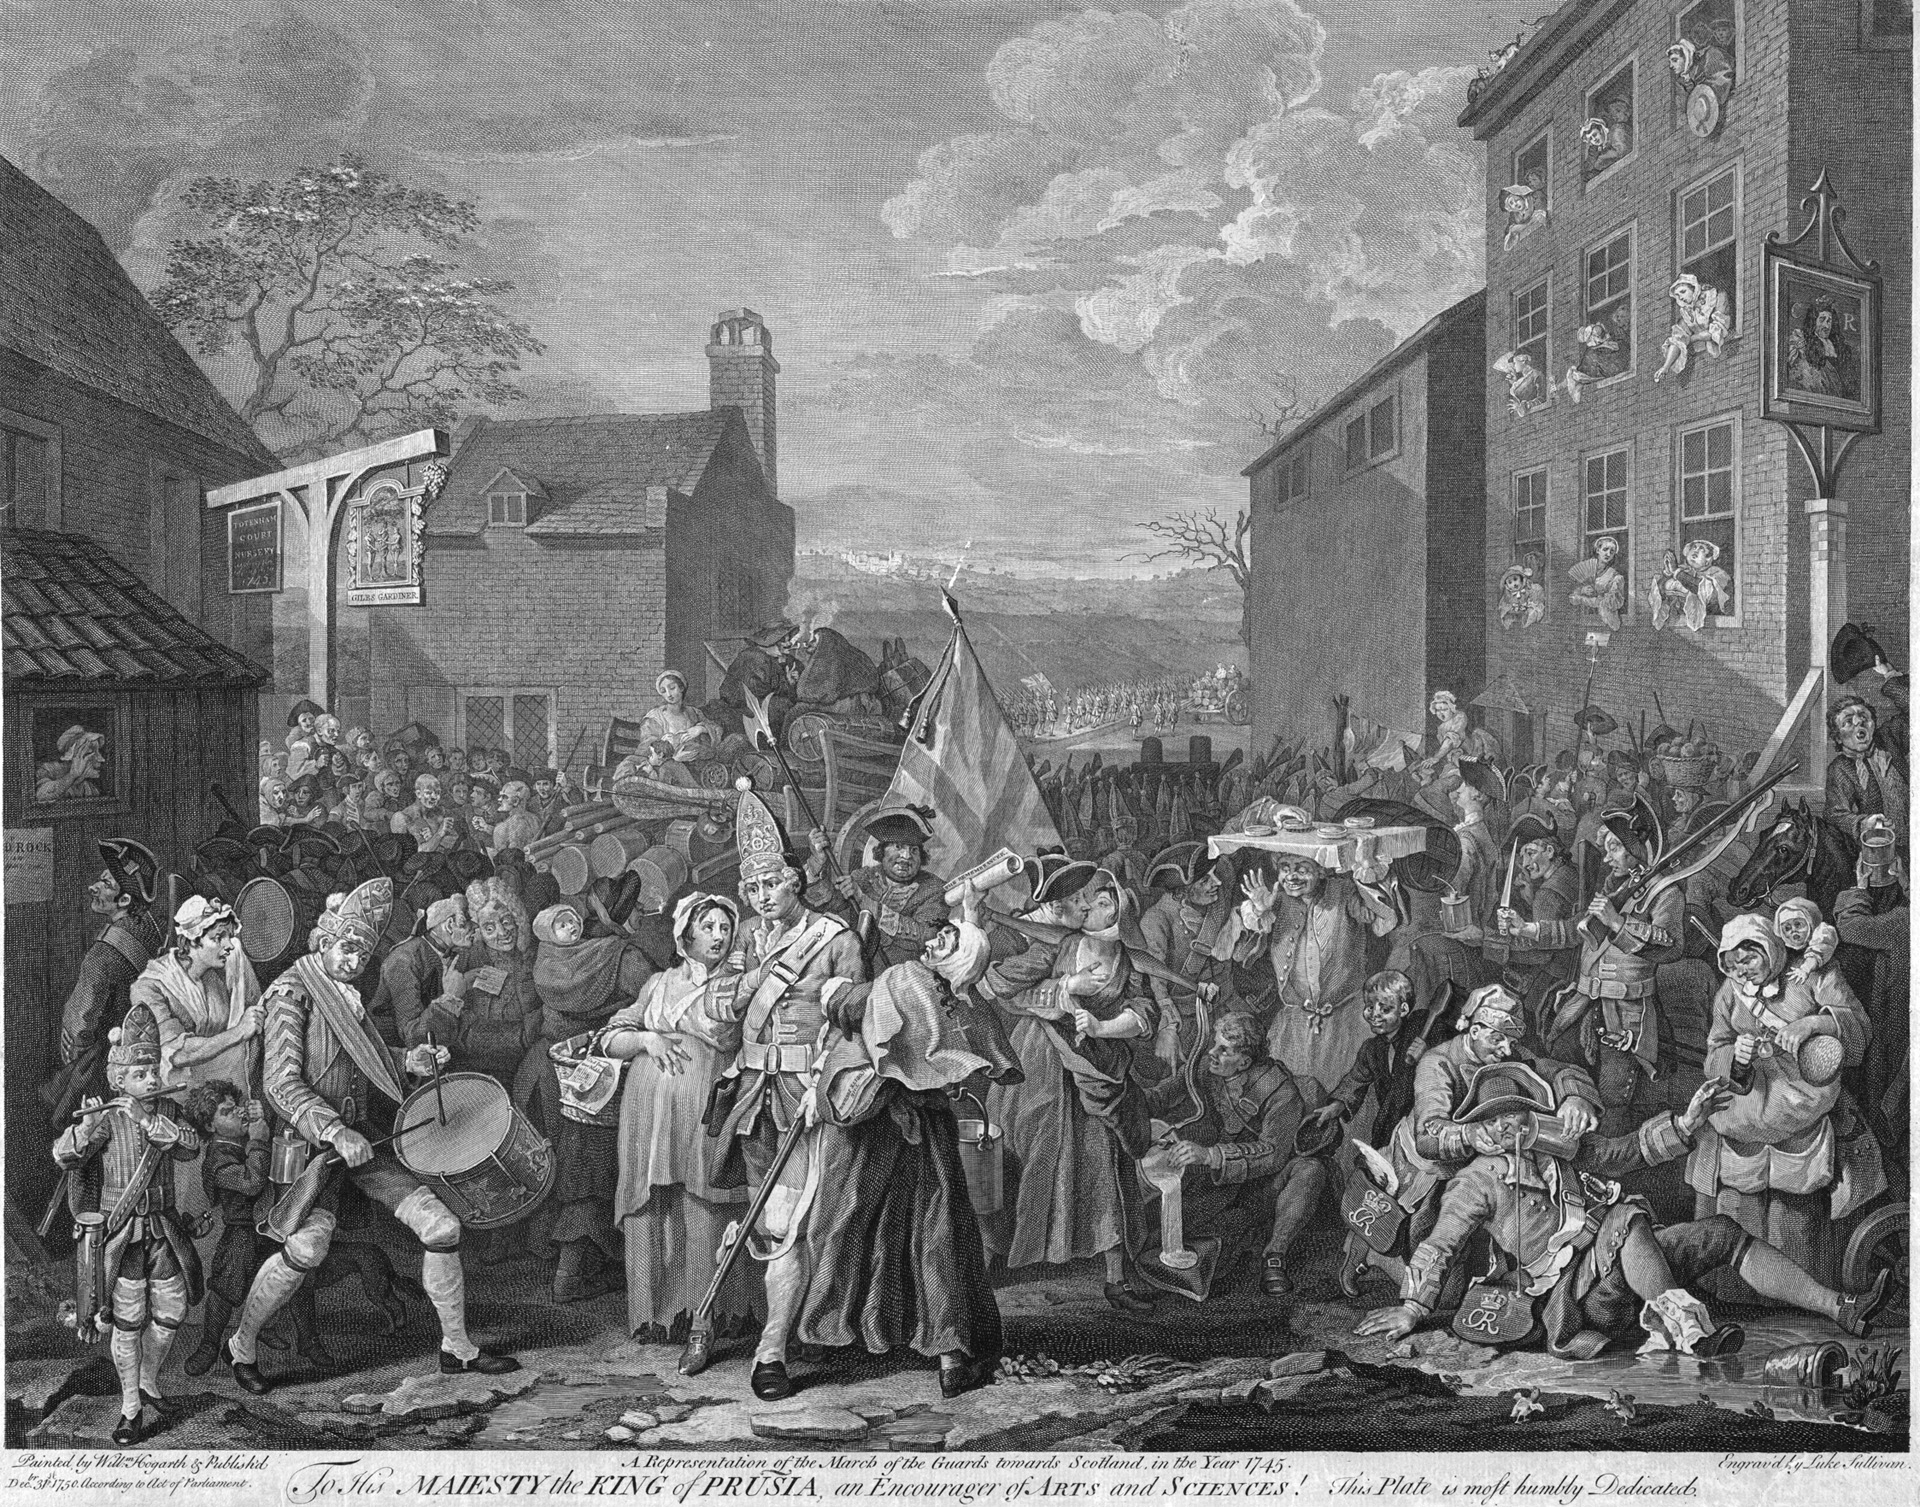 William Hogarth’s contemporary drawing depicts with great satire the British army on the march in the Forty-Five Rebellion. The British eventually assembled a crack army under William, Duke of Cumberland, which outfought the Highlanders.